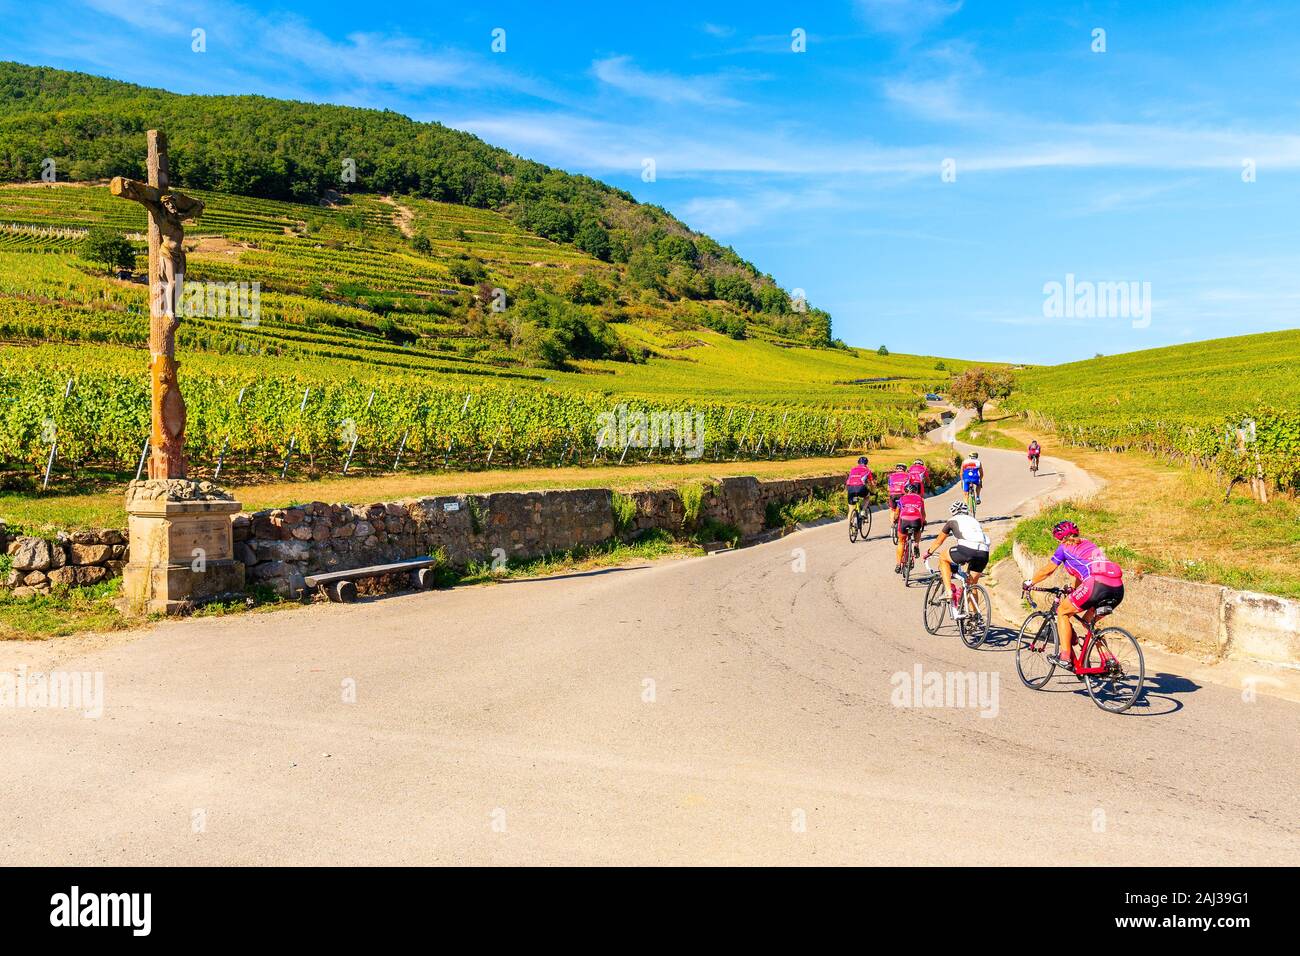 RIQUEWIHR, FRANCE - SEP 20, 2019: Men on road bikes cycling in vineyards near Riquewihr village on Alsatian Wine Route, France. Stock Photo